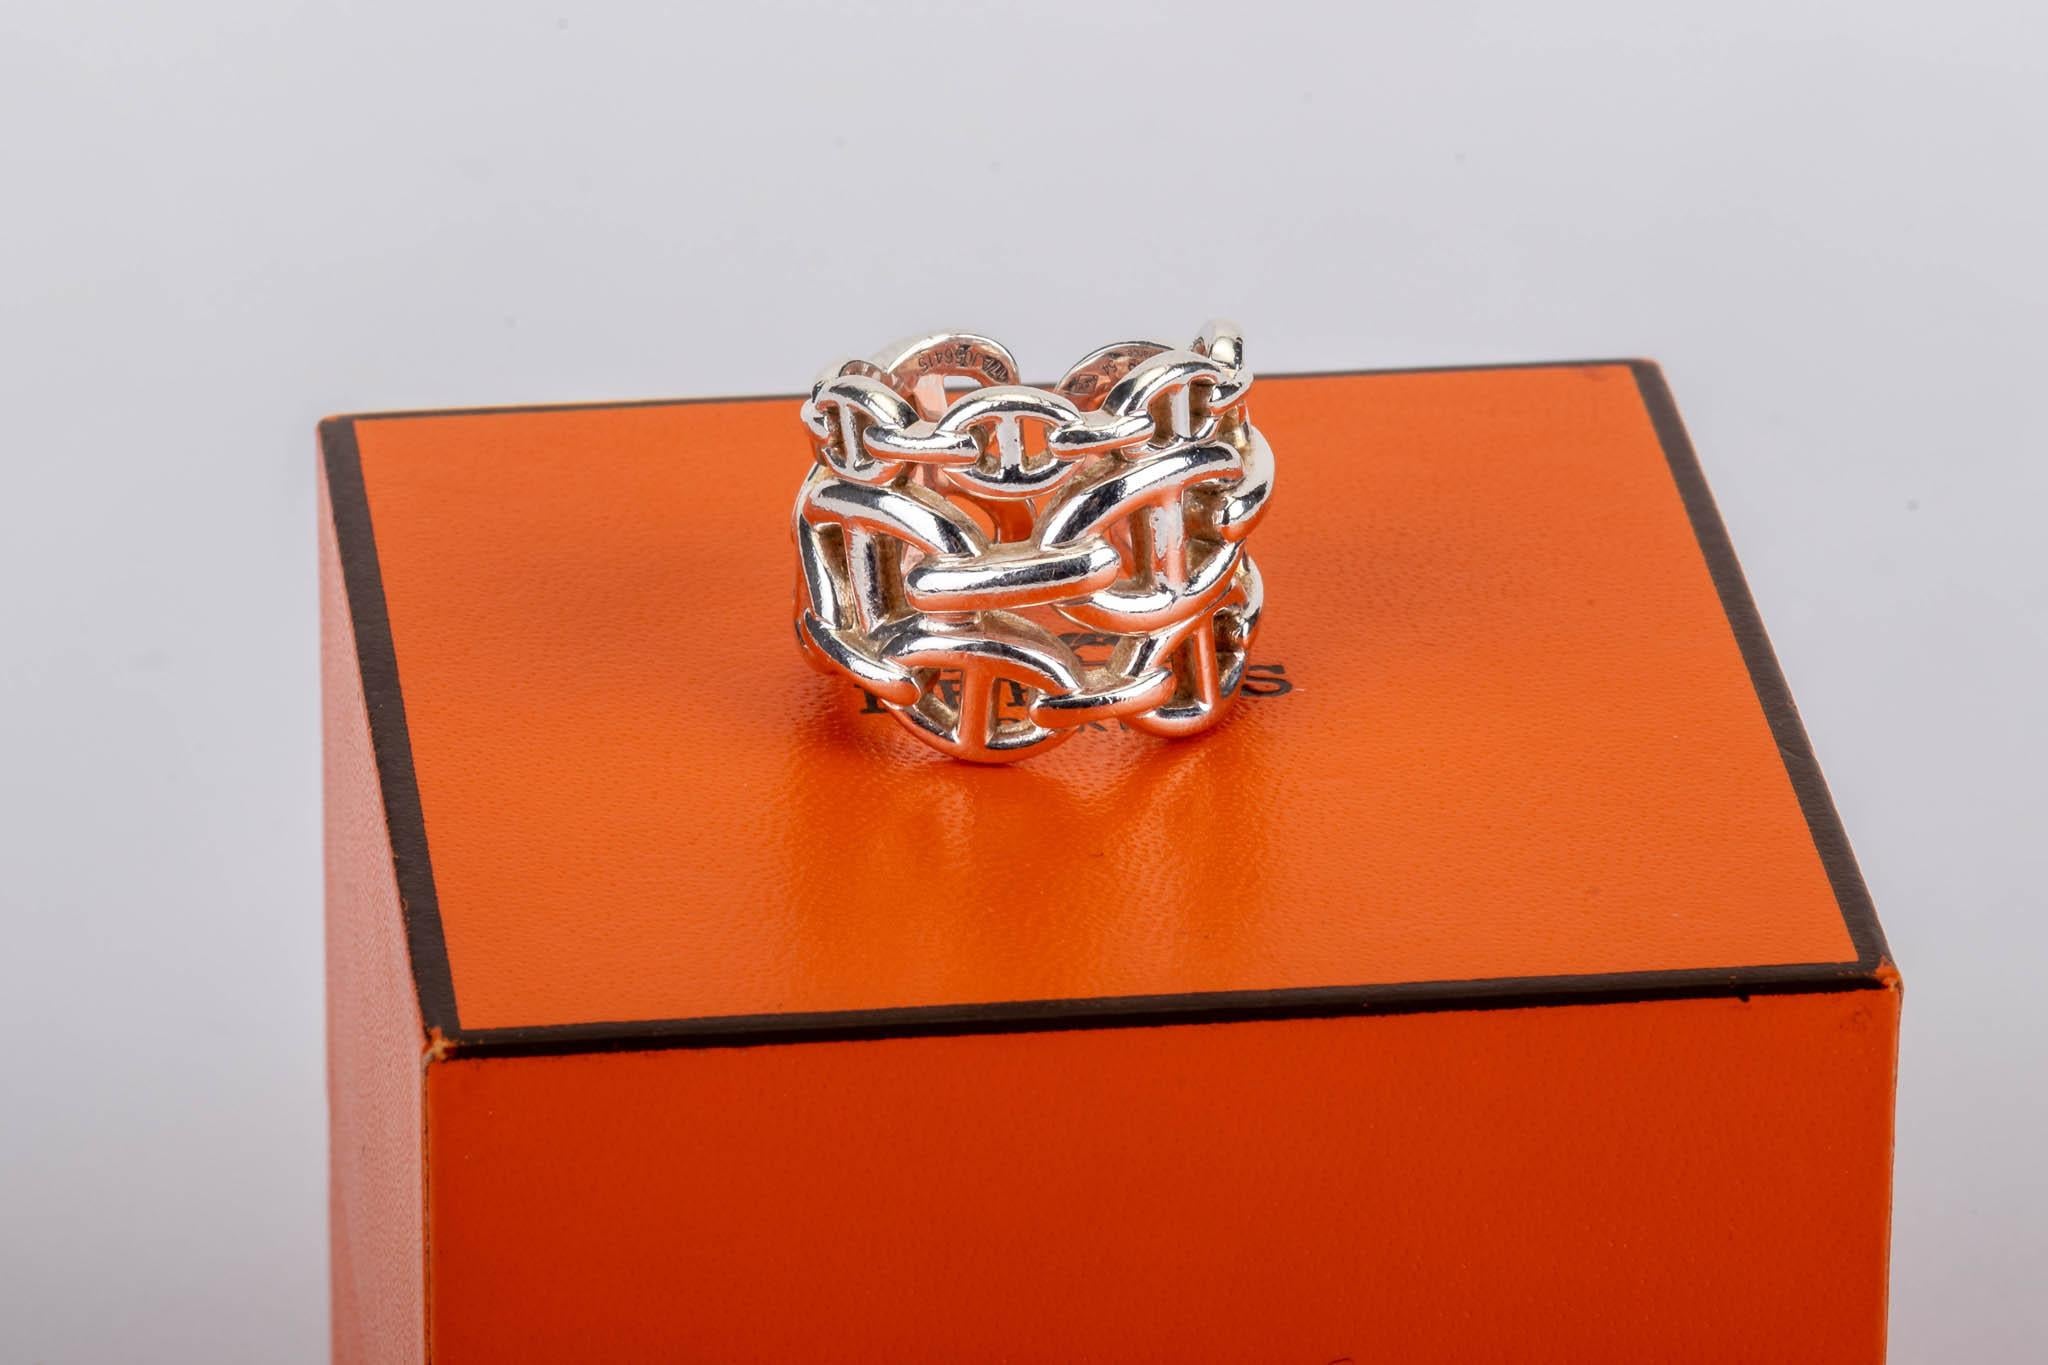 Hermes triple chain d'ancre female ring. Sterling silver 925. Size 54. Comes with original box.